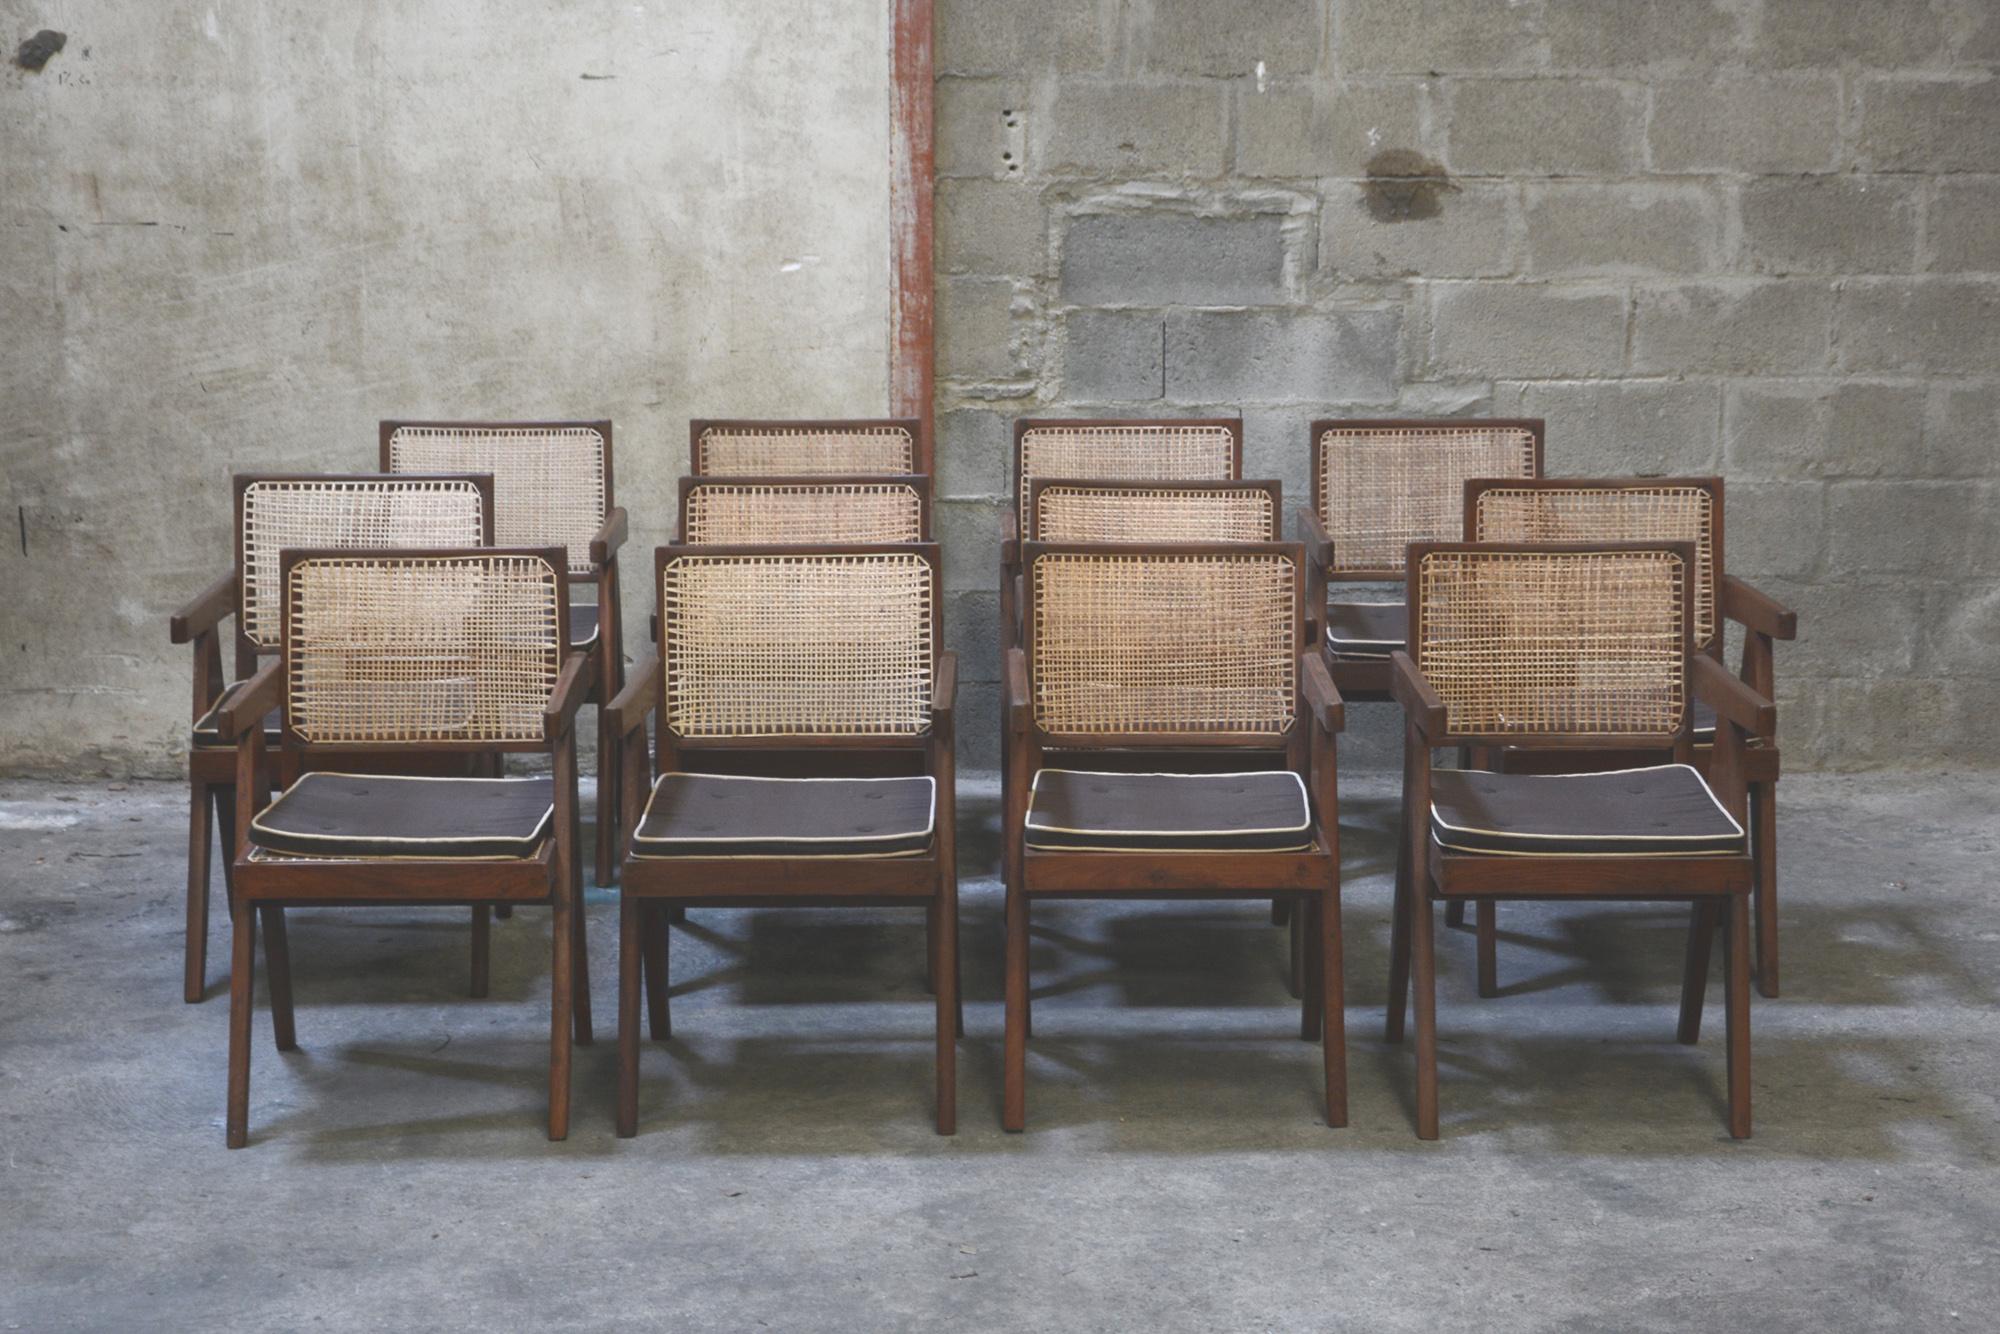 Pierre Jeanneret, Exceptional rare set of 12 cane and teakwood office Armchairs designed for an administrative building in Chandigarh, India. Back attached to the seat. Teak, woven cane and upholstered seat cushion featuring cloth covering. 4 are